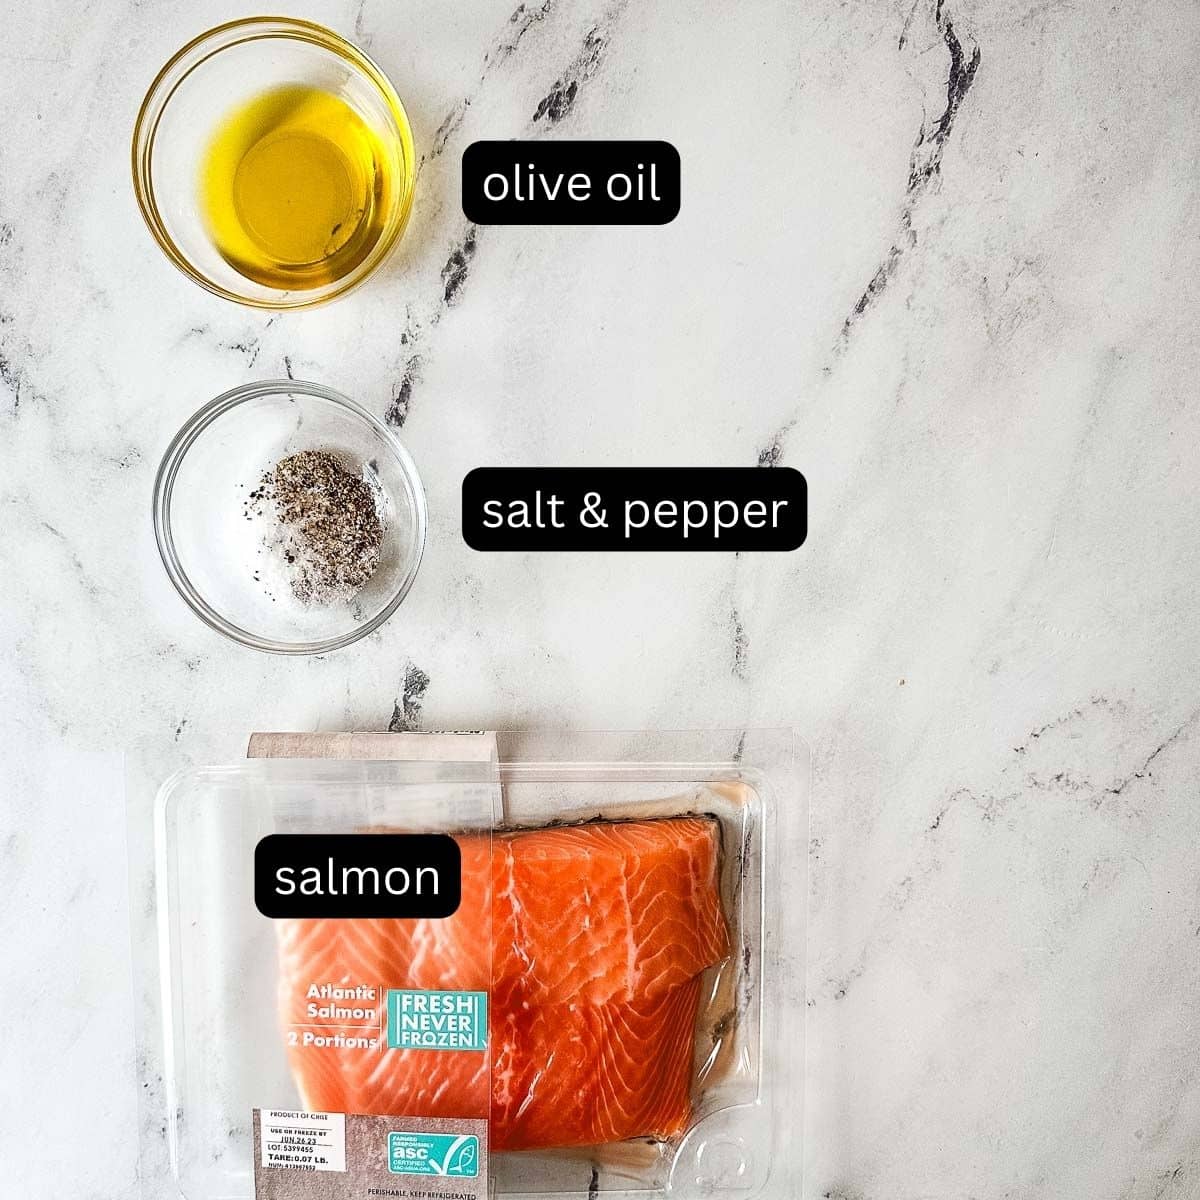 Labeled ingredients for pan-seared salmon on a white marble counter.